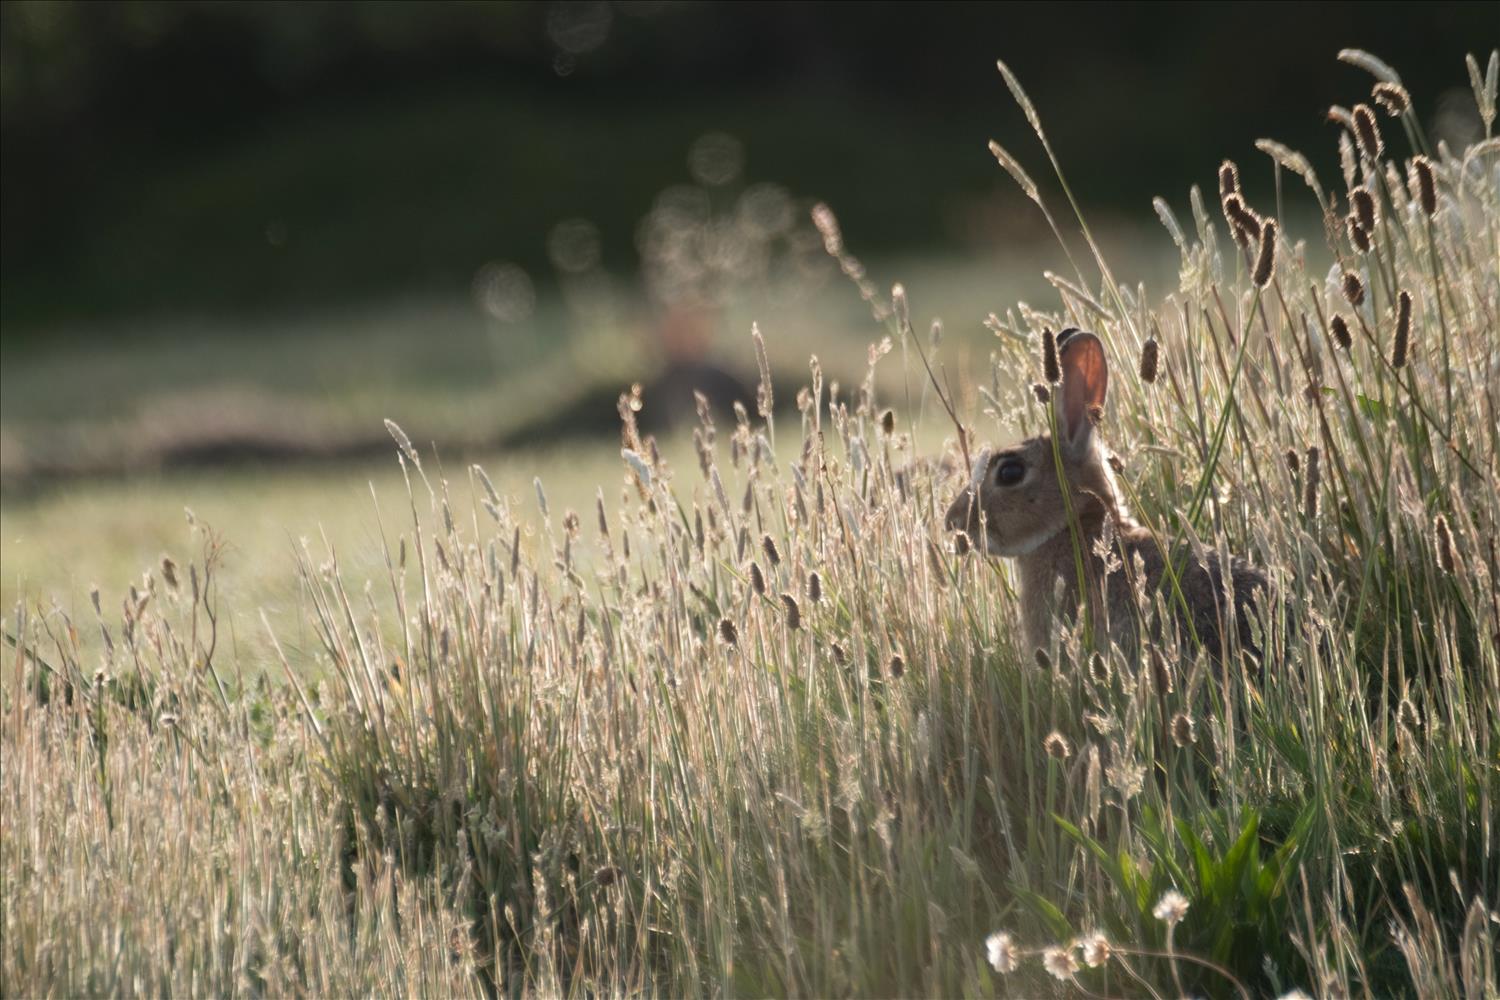 A rabbit in the long grass, its' ears translucent in the sun